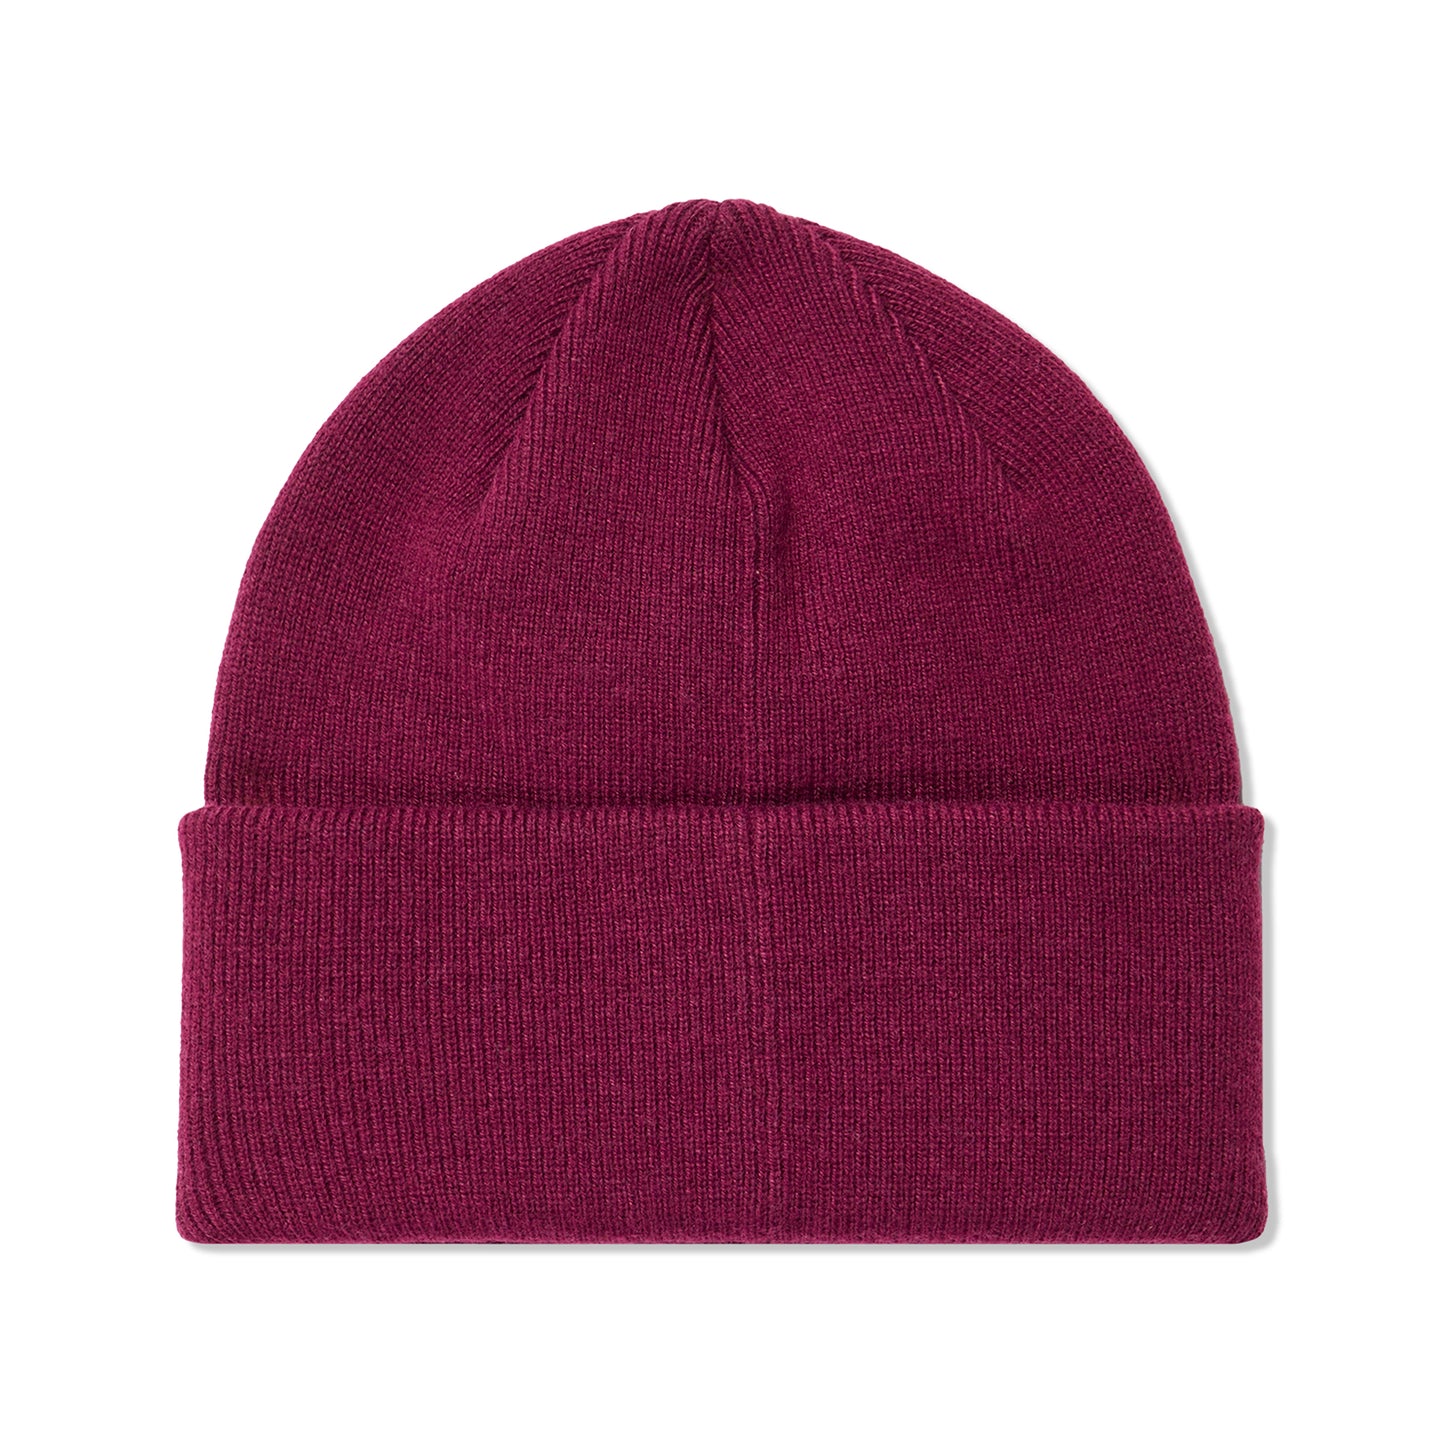 – The Embossed North Beanie Boysenberry) Urban Face Concepts